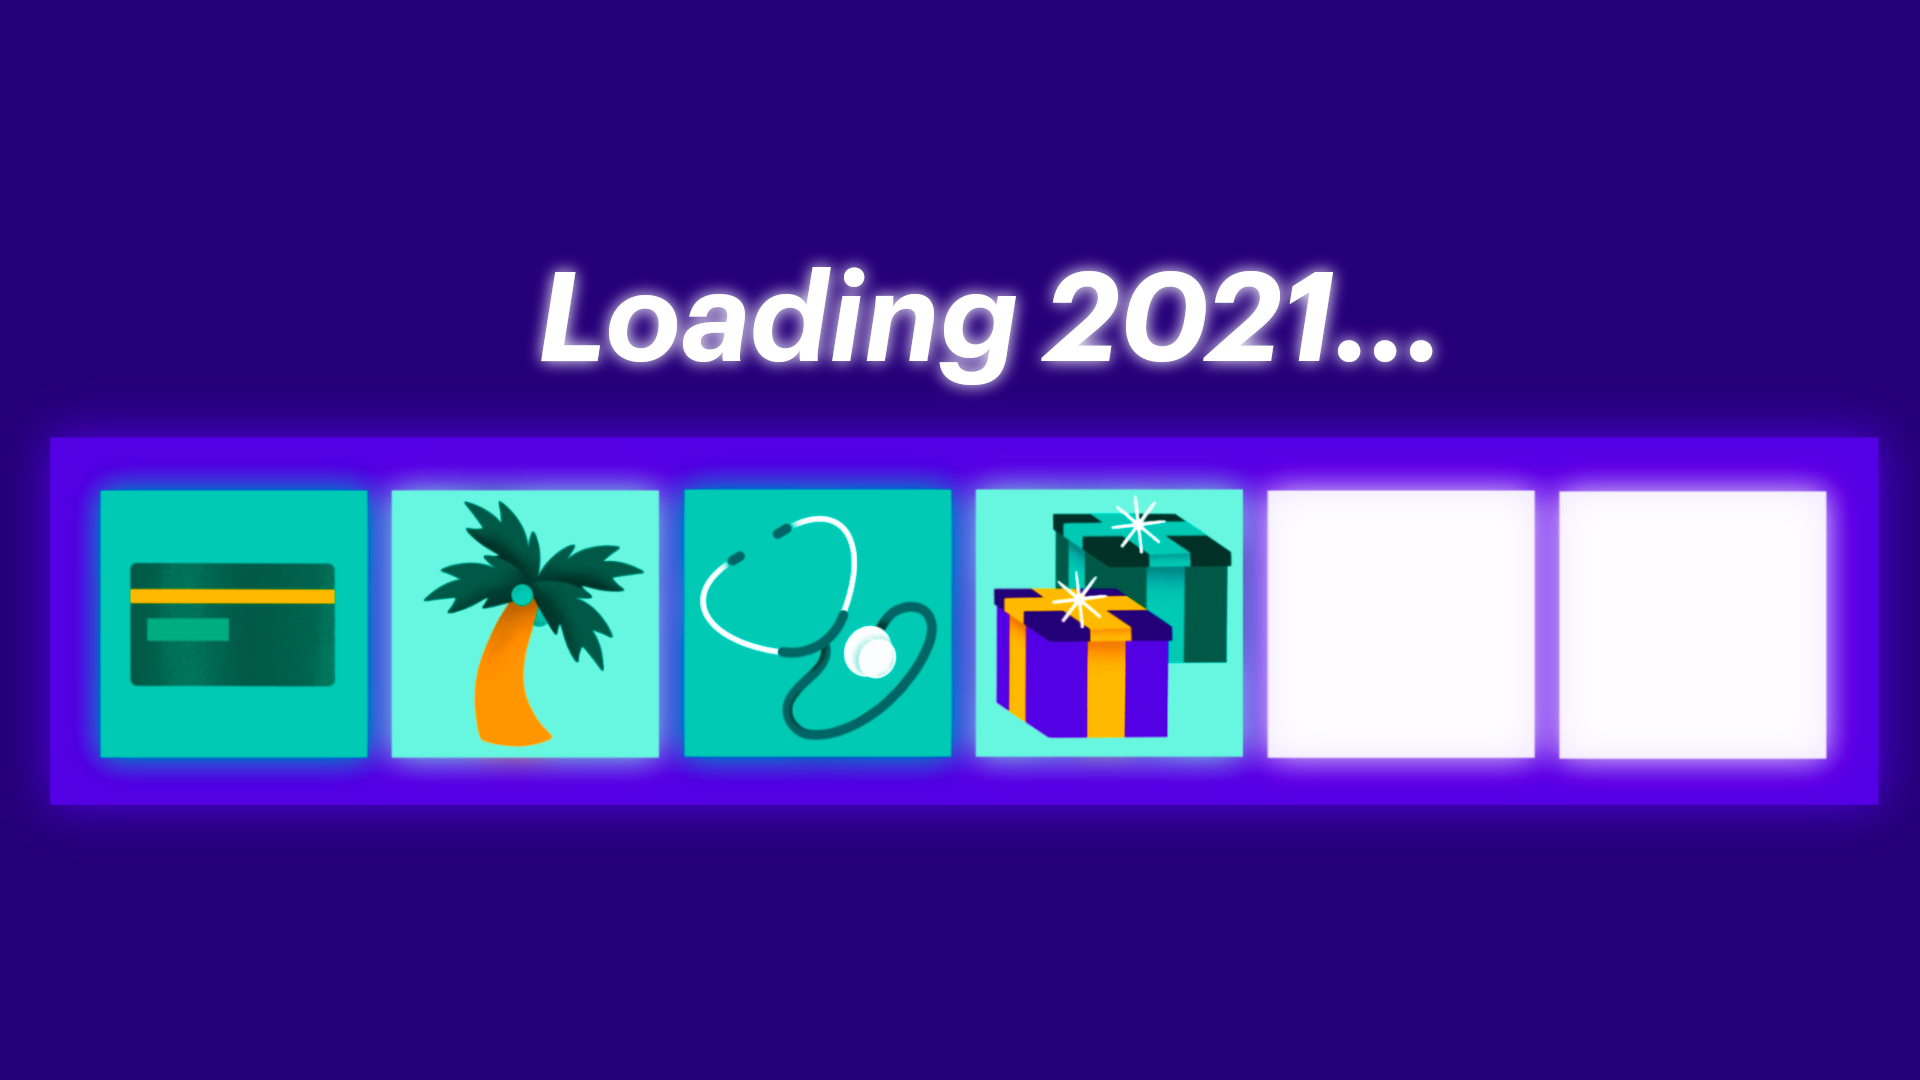 Loading bar with money tasks leading to 2021